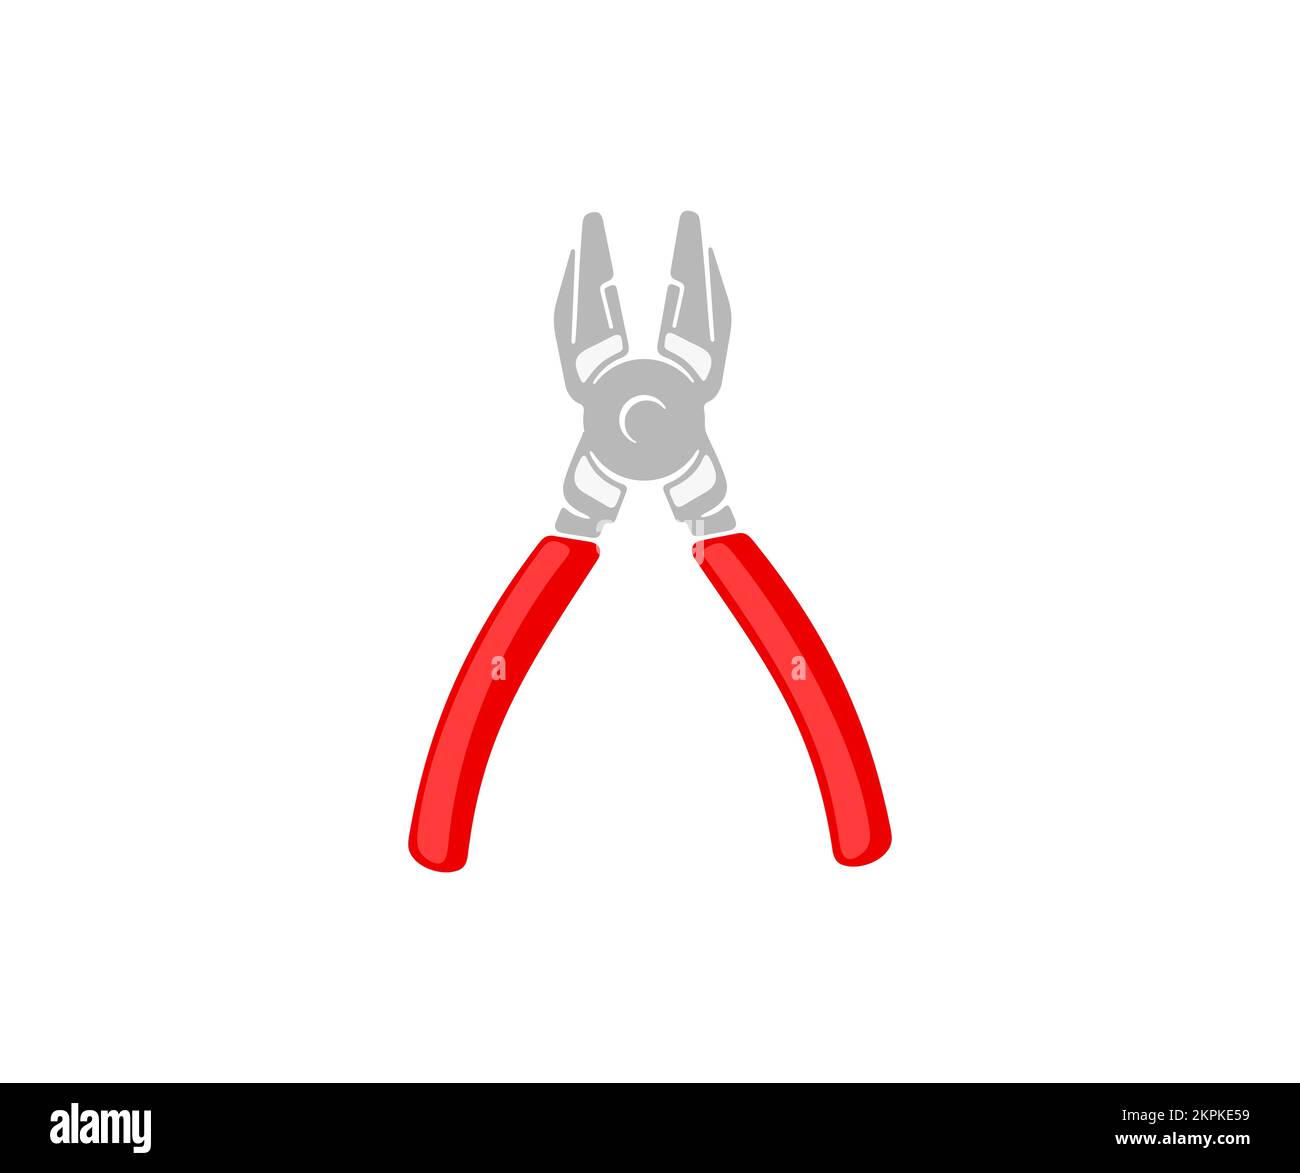 Pliers, groove pliers, tool, for holding, clamping and tightening, graphic design. Work and construction tool, electrical, renovation, repair Stock Vector